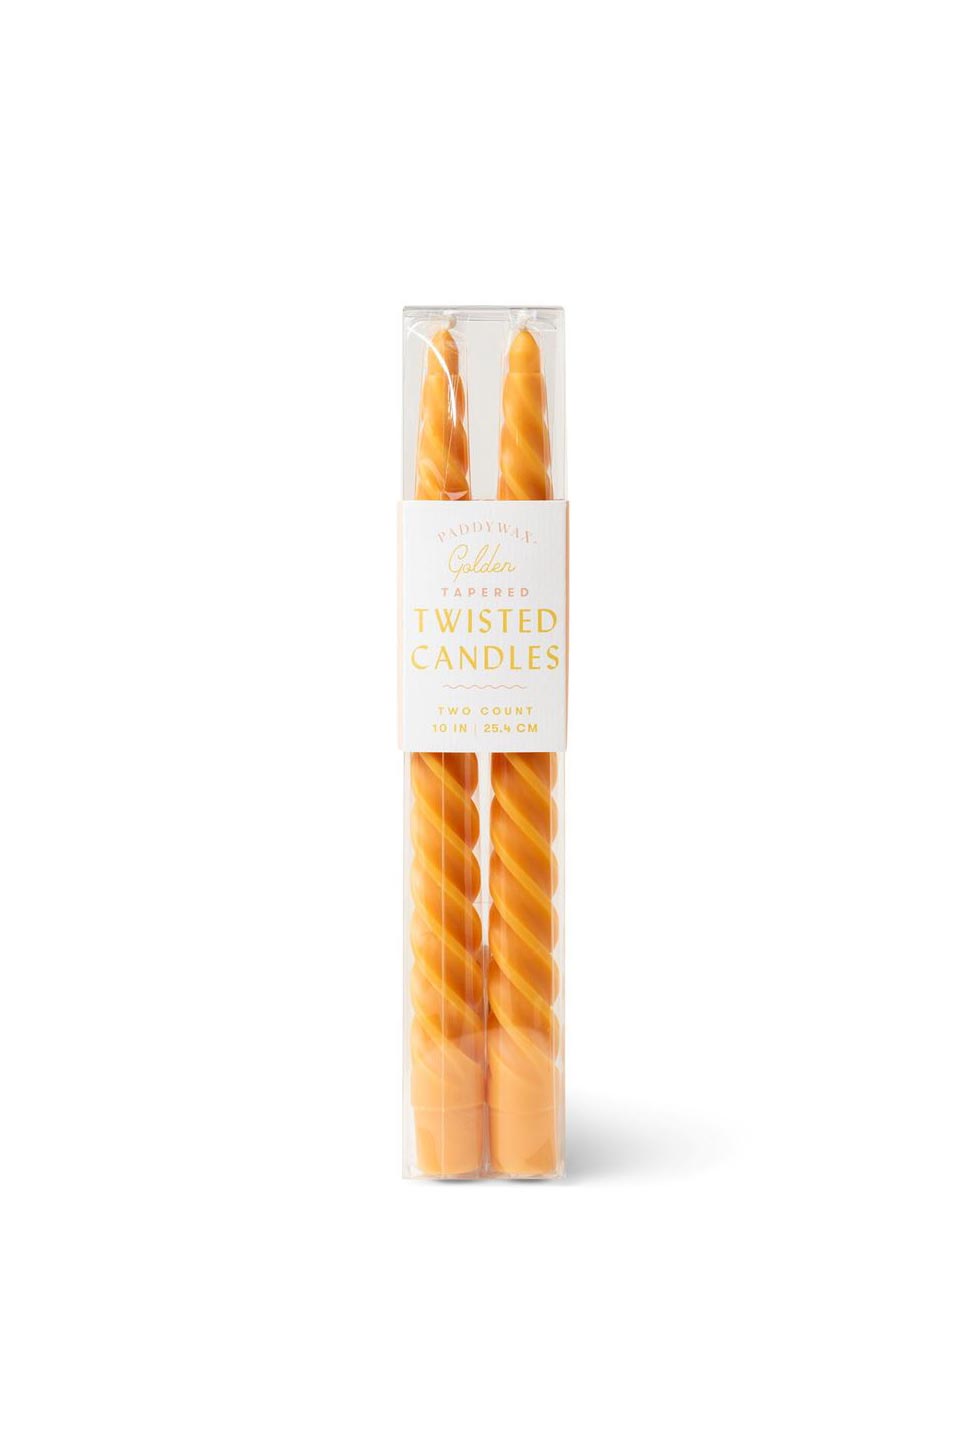 Paddywax - Twisted Taper 10" Boxed Candles - Gold